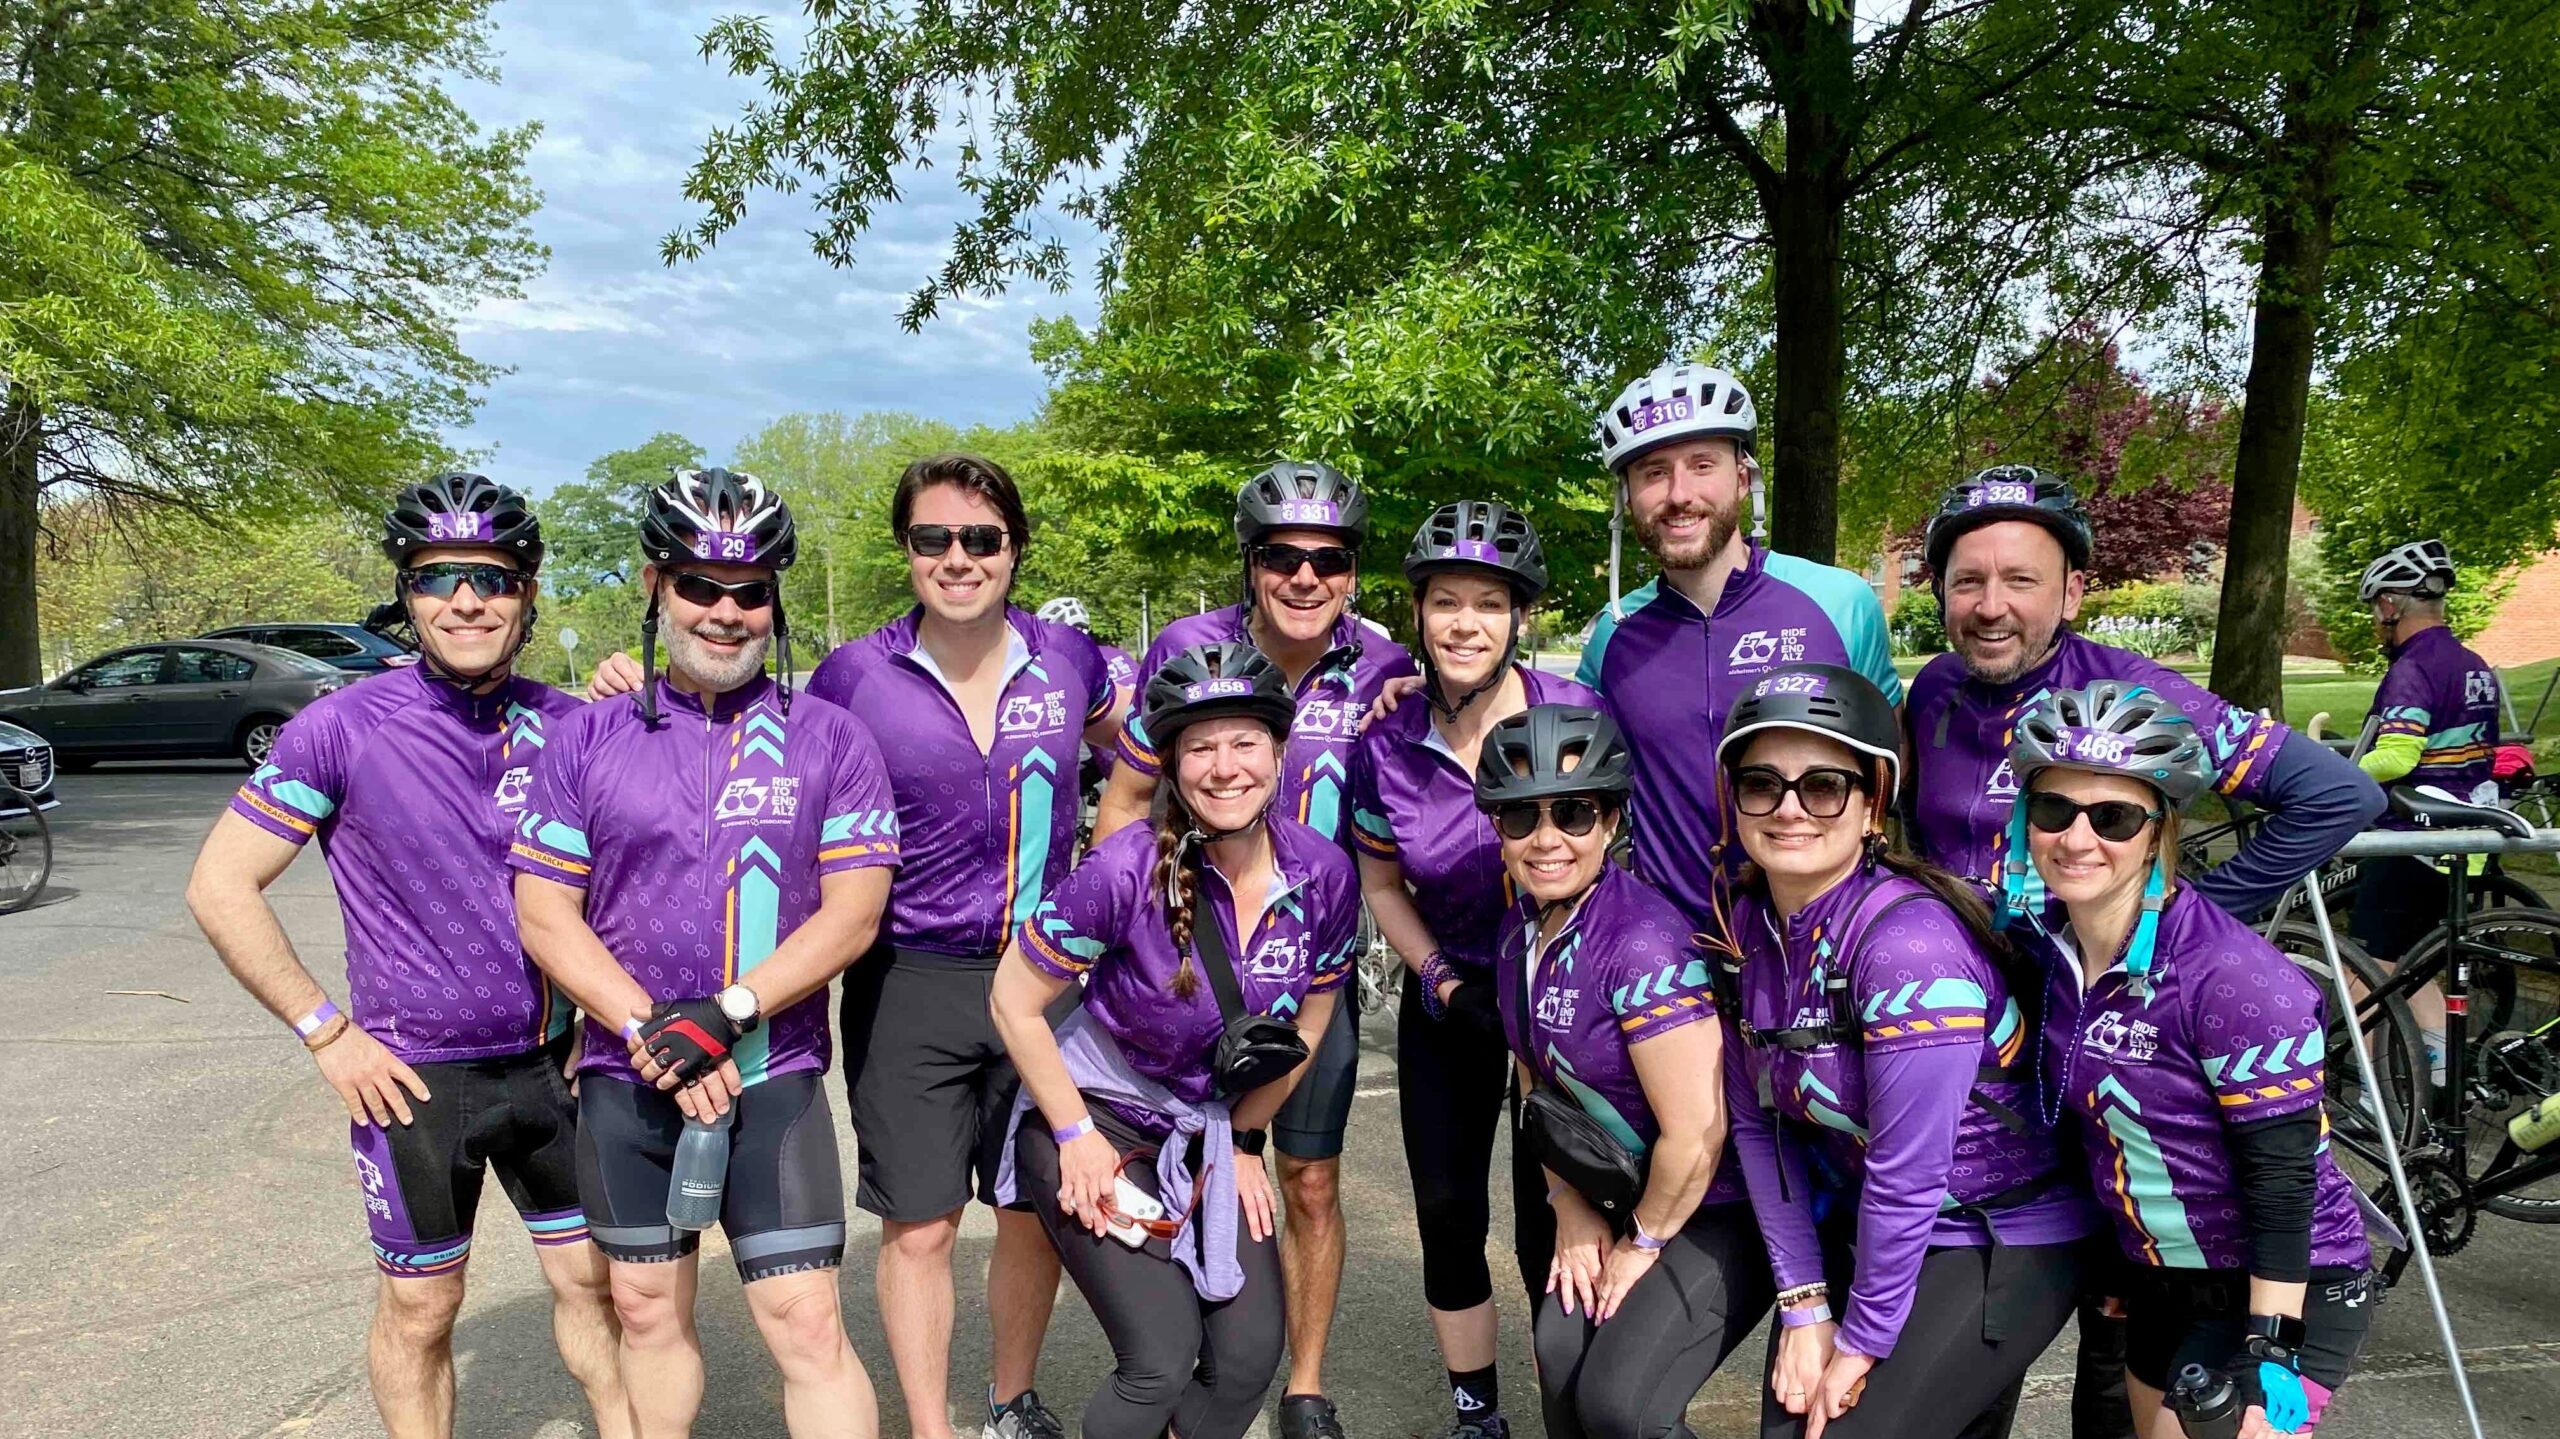 Rappaport Raises over $52,000 for the Ride to End ALZ